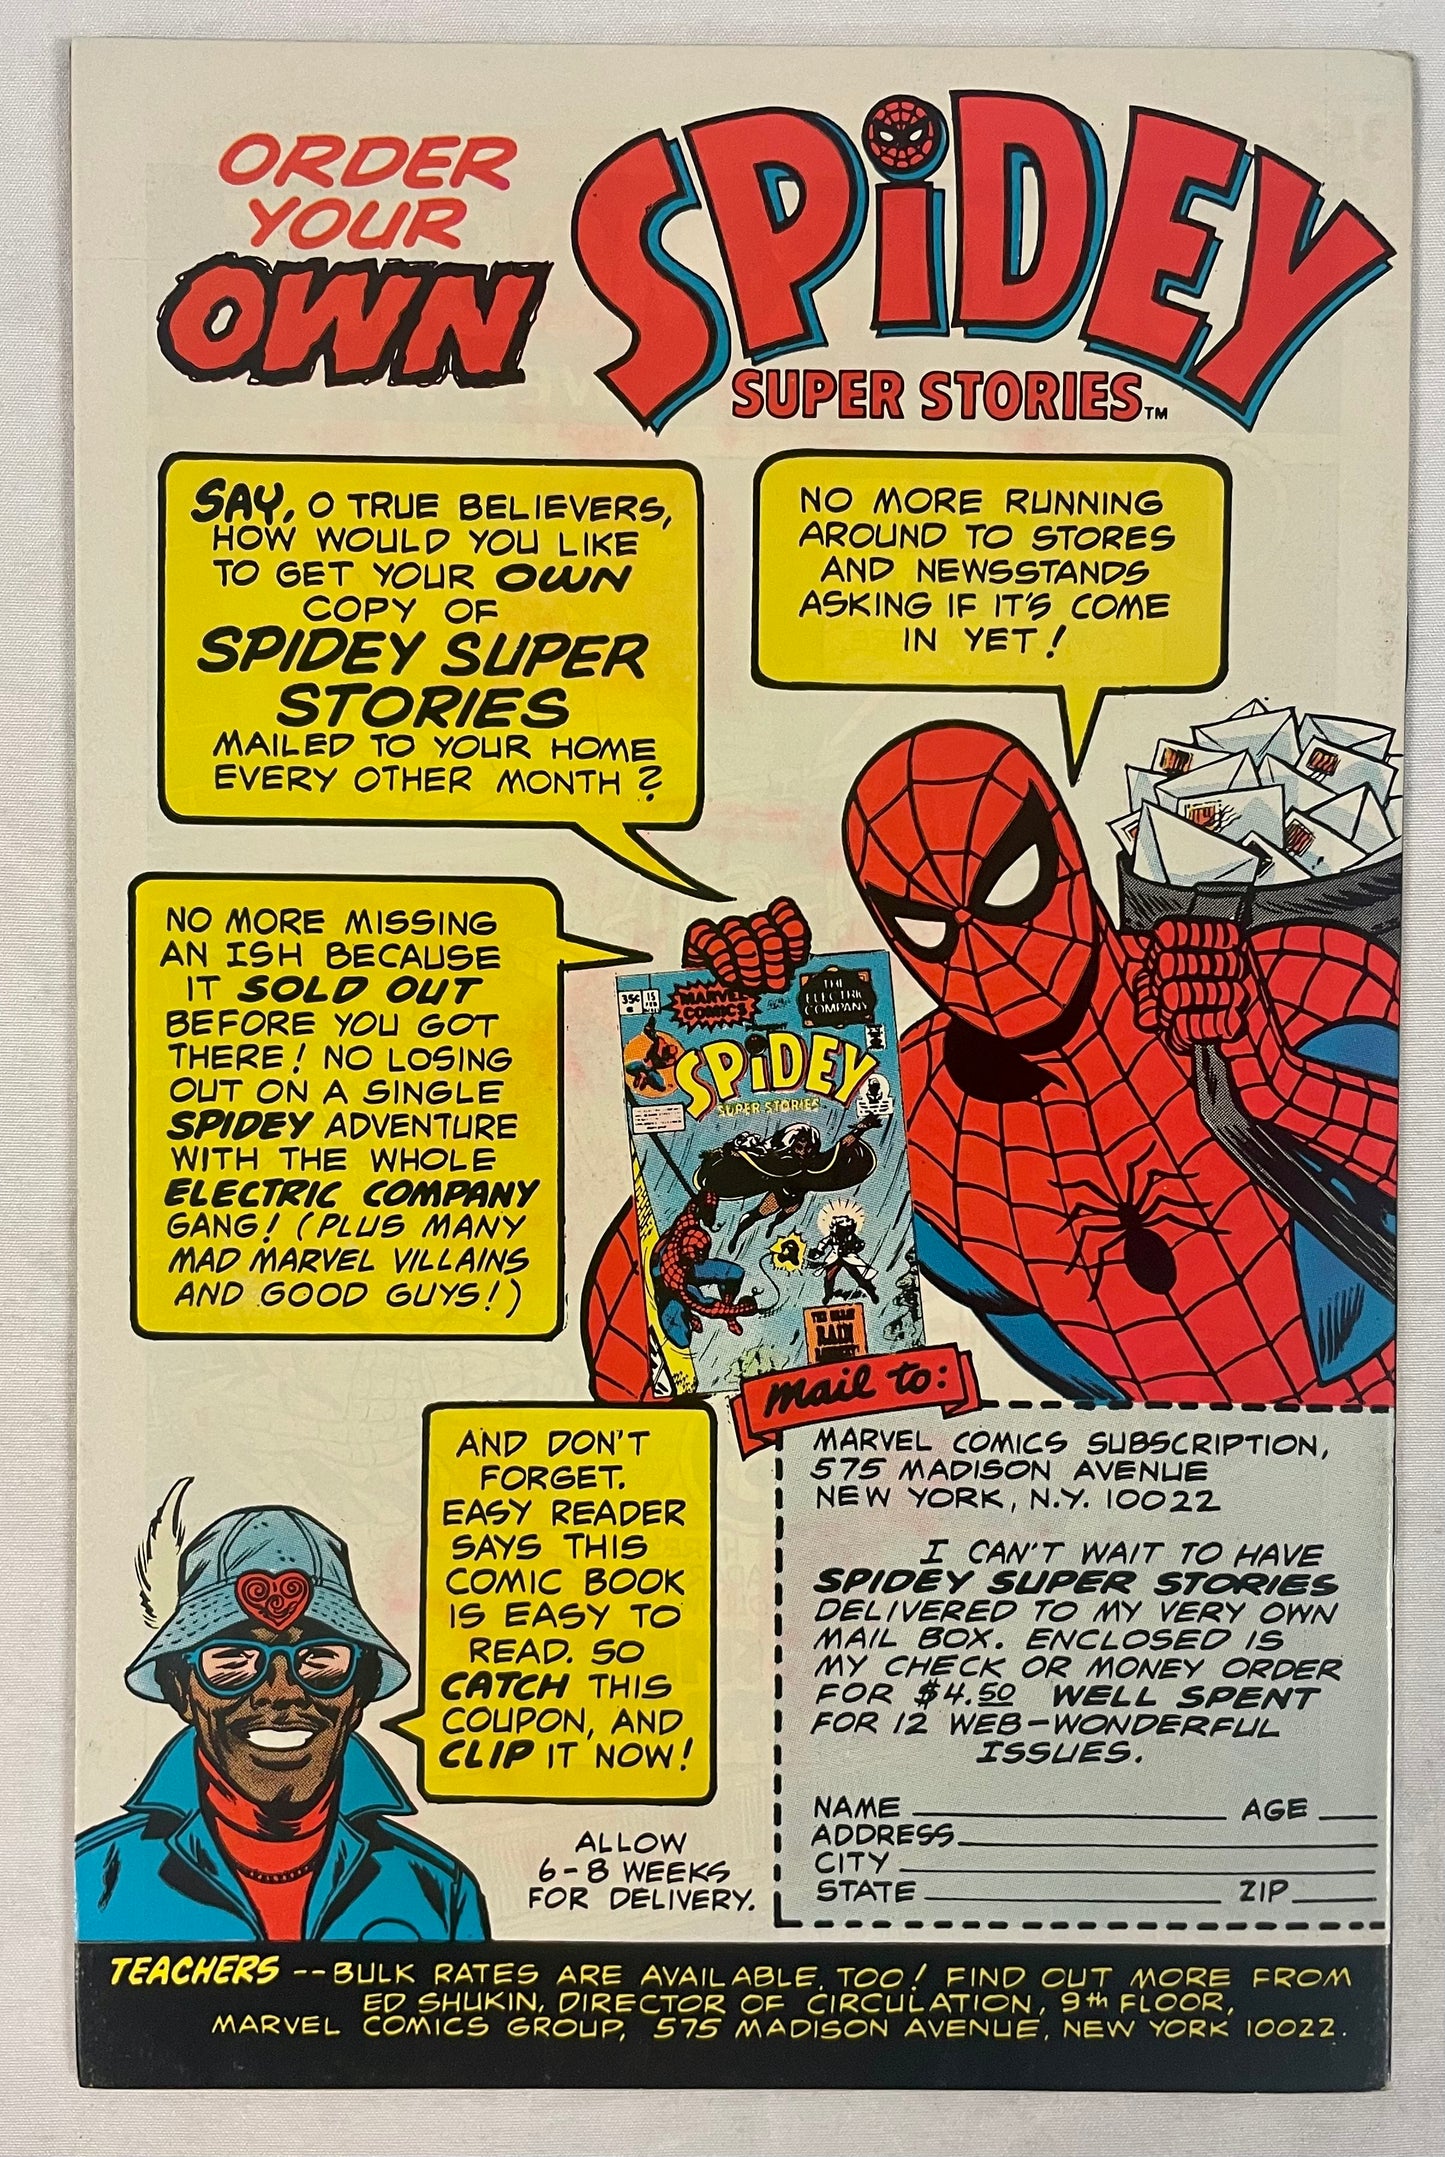 Marvel Comics And The Electric Company Presents Spidey Super Stories #15